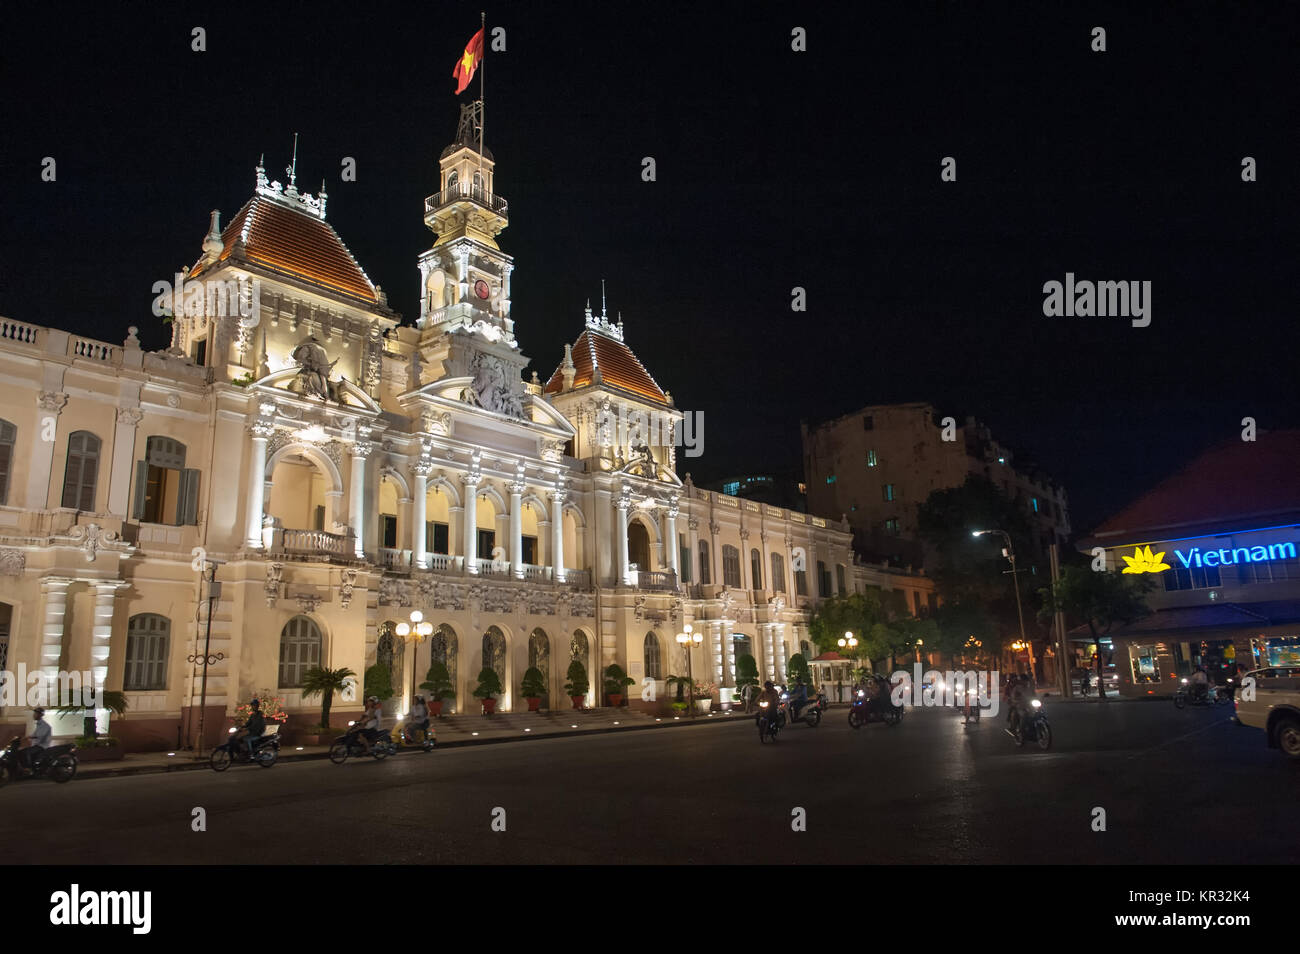 Ho Chi Minh City Hall by night. Formerly known as Hotel de Ville it was built in French colonial style and remains Saigon’s most iconic building. Stock Photo